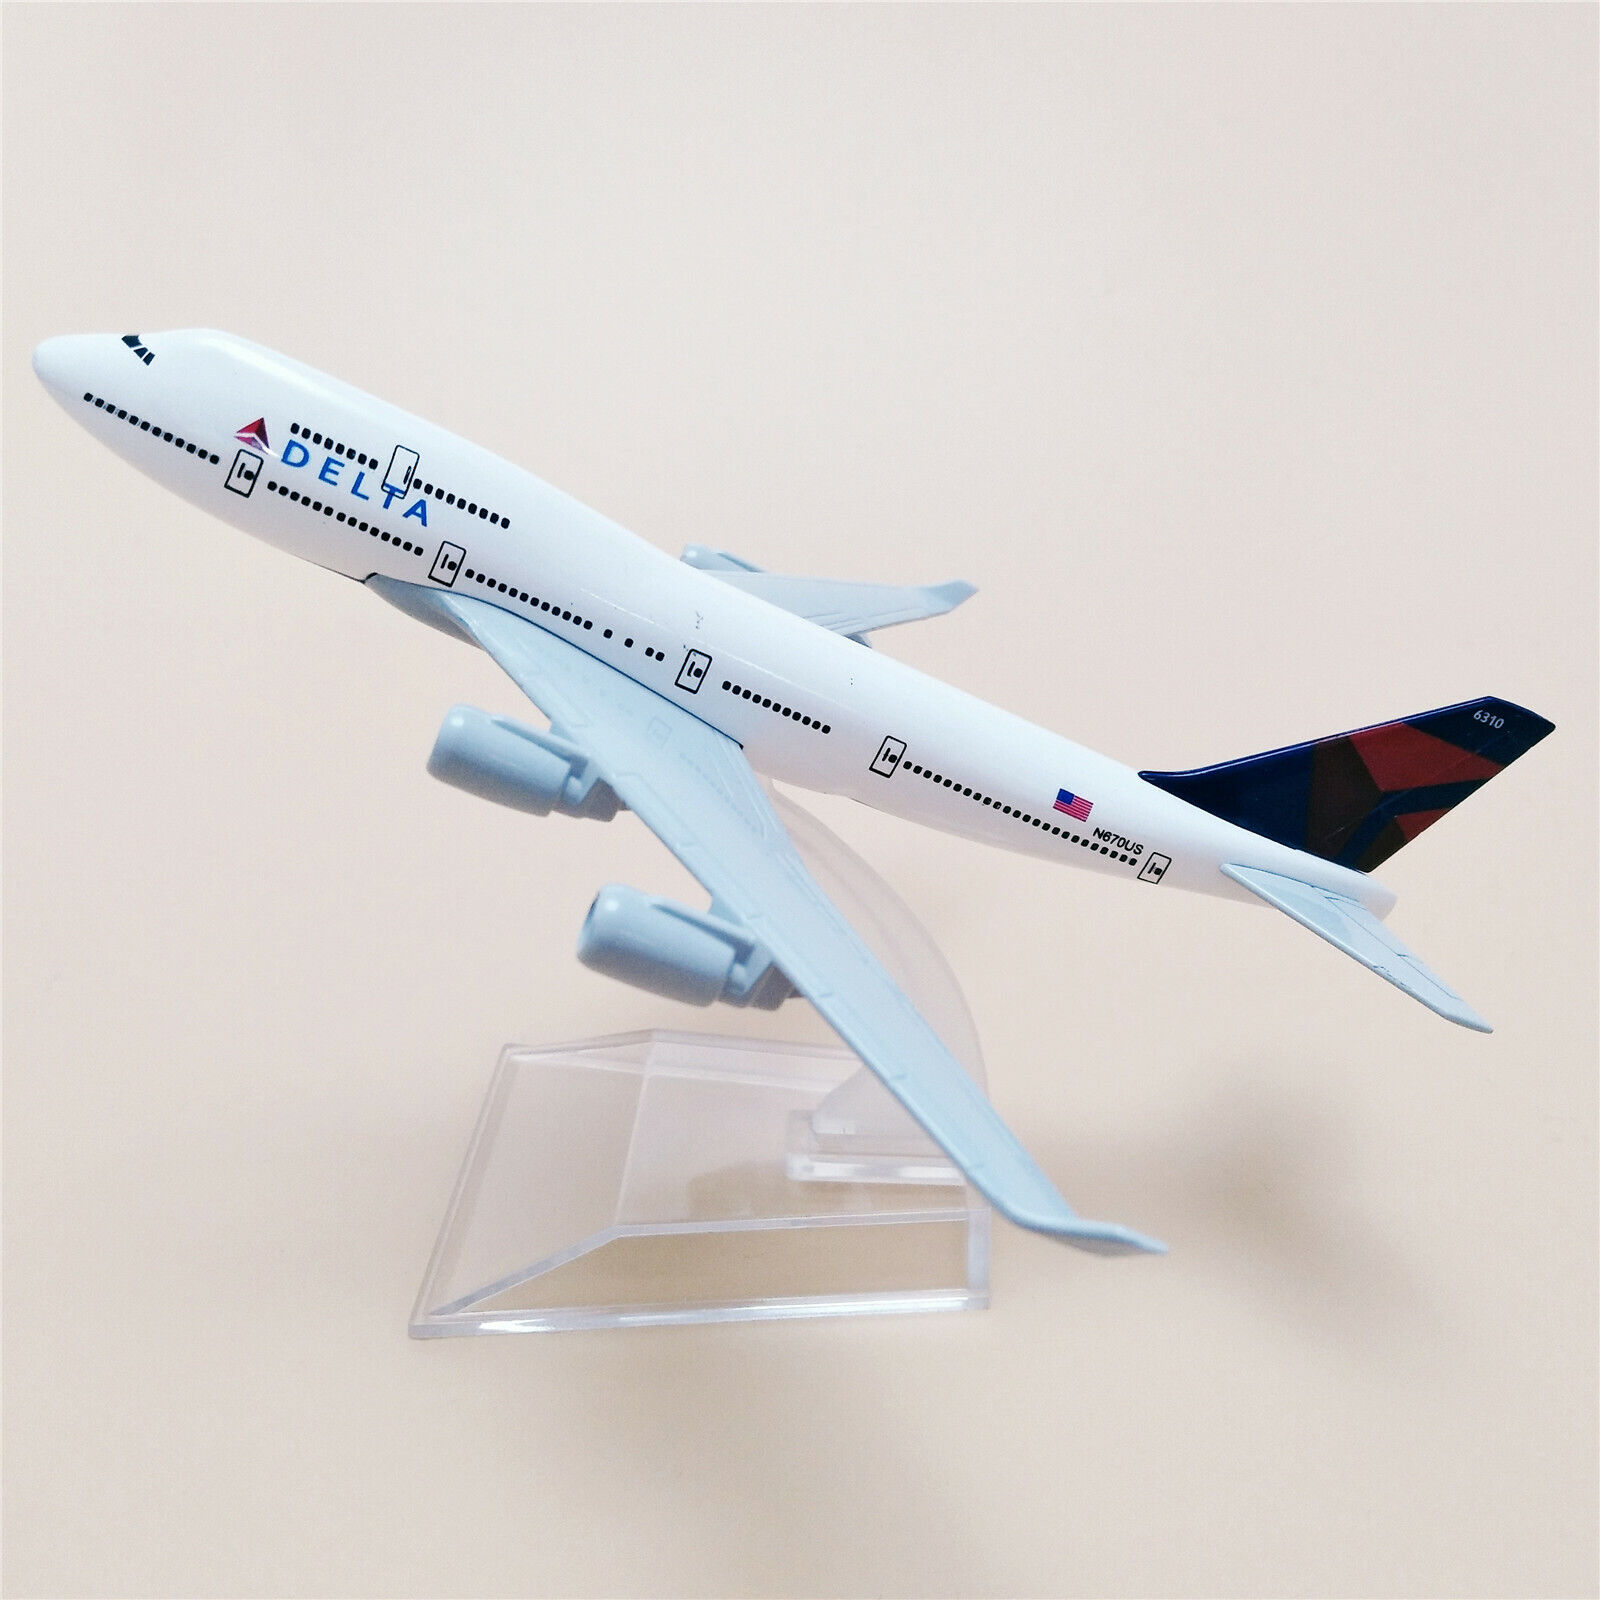 16cm Air American DELTA Boeing B747 Airlines Airplane Model Plane Aircraft Alloy